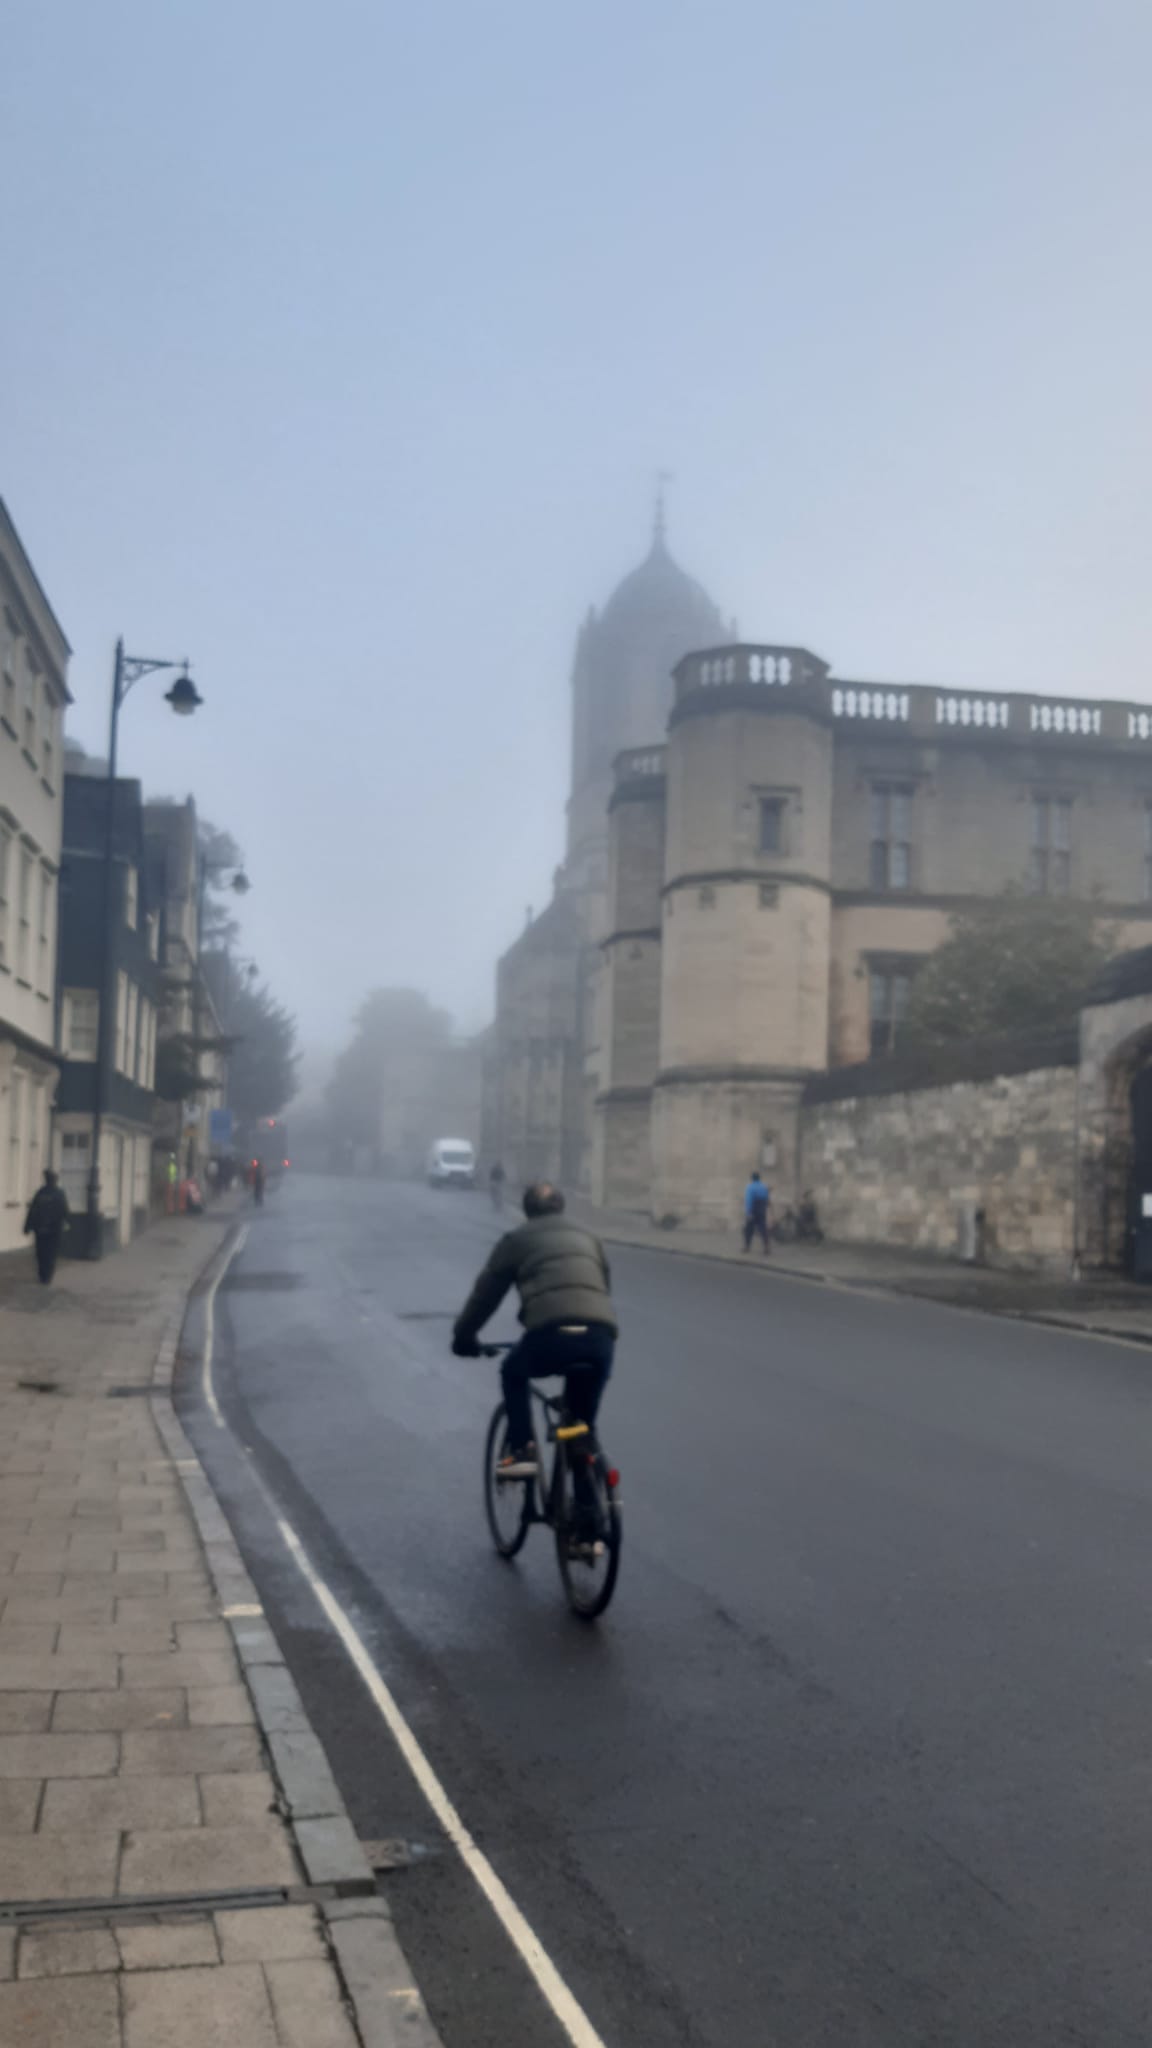 A view of St Aldates street on a misty grey morning with Christchurch College's Tom Tower appearing through the mist and a cyclist on the street ahead.